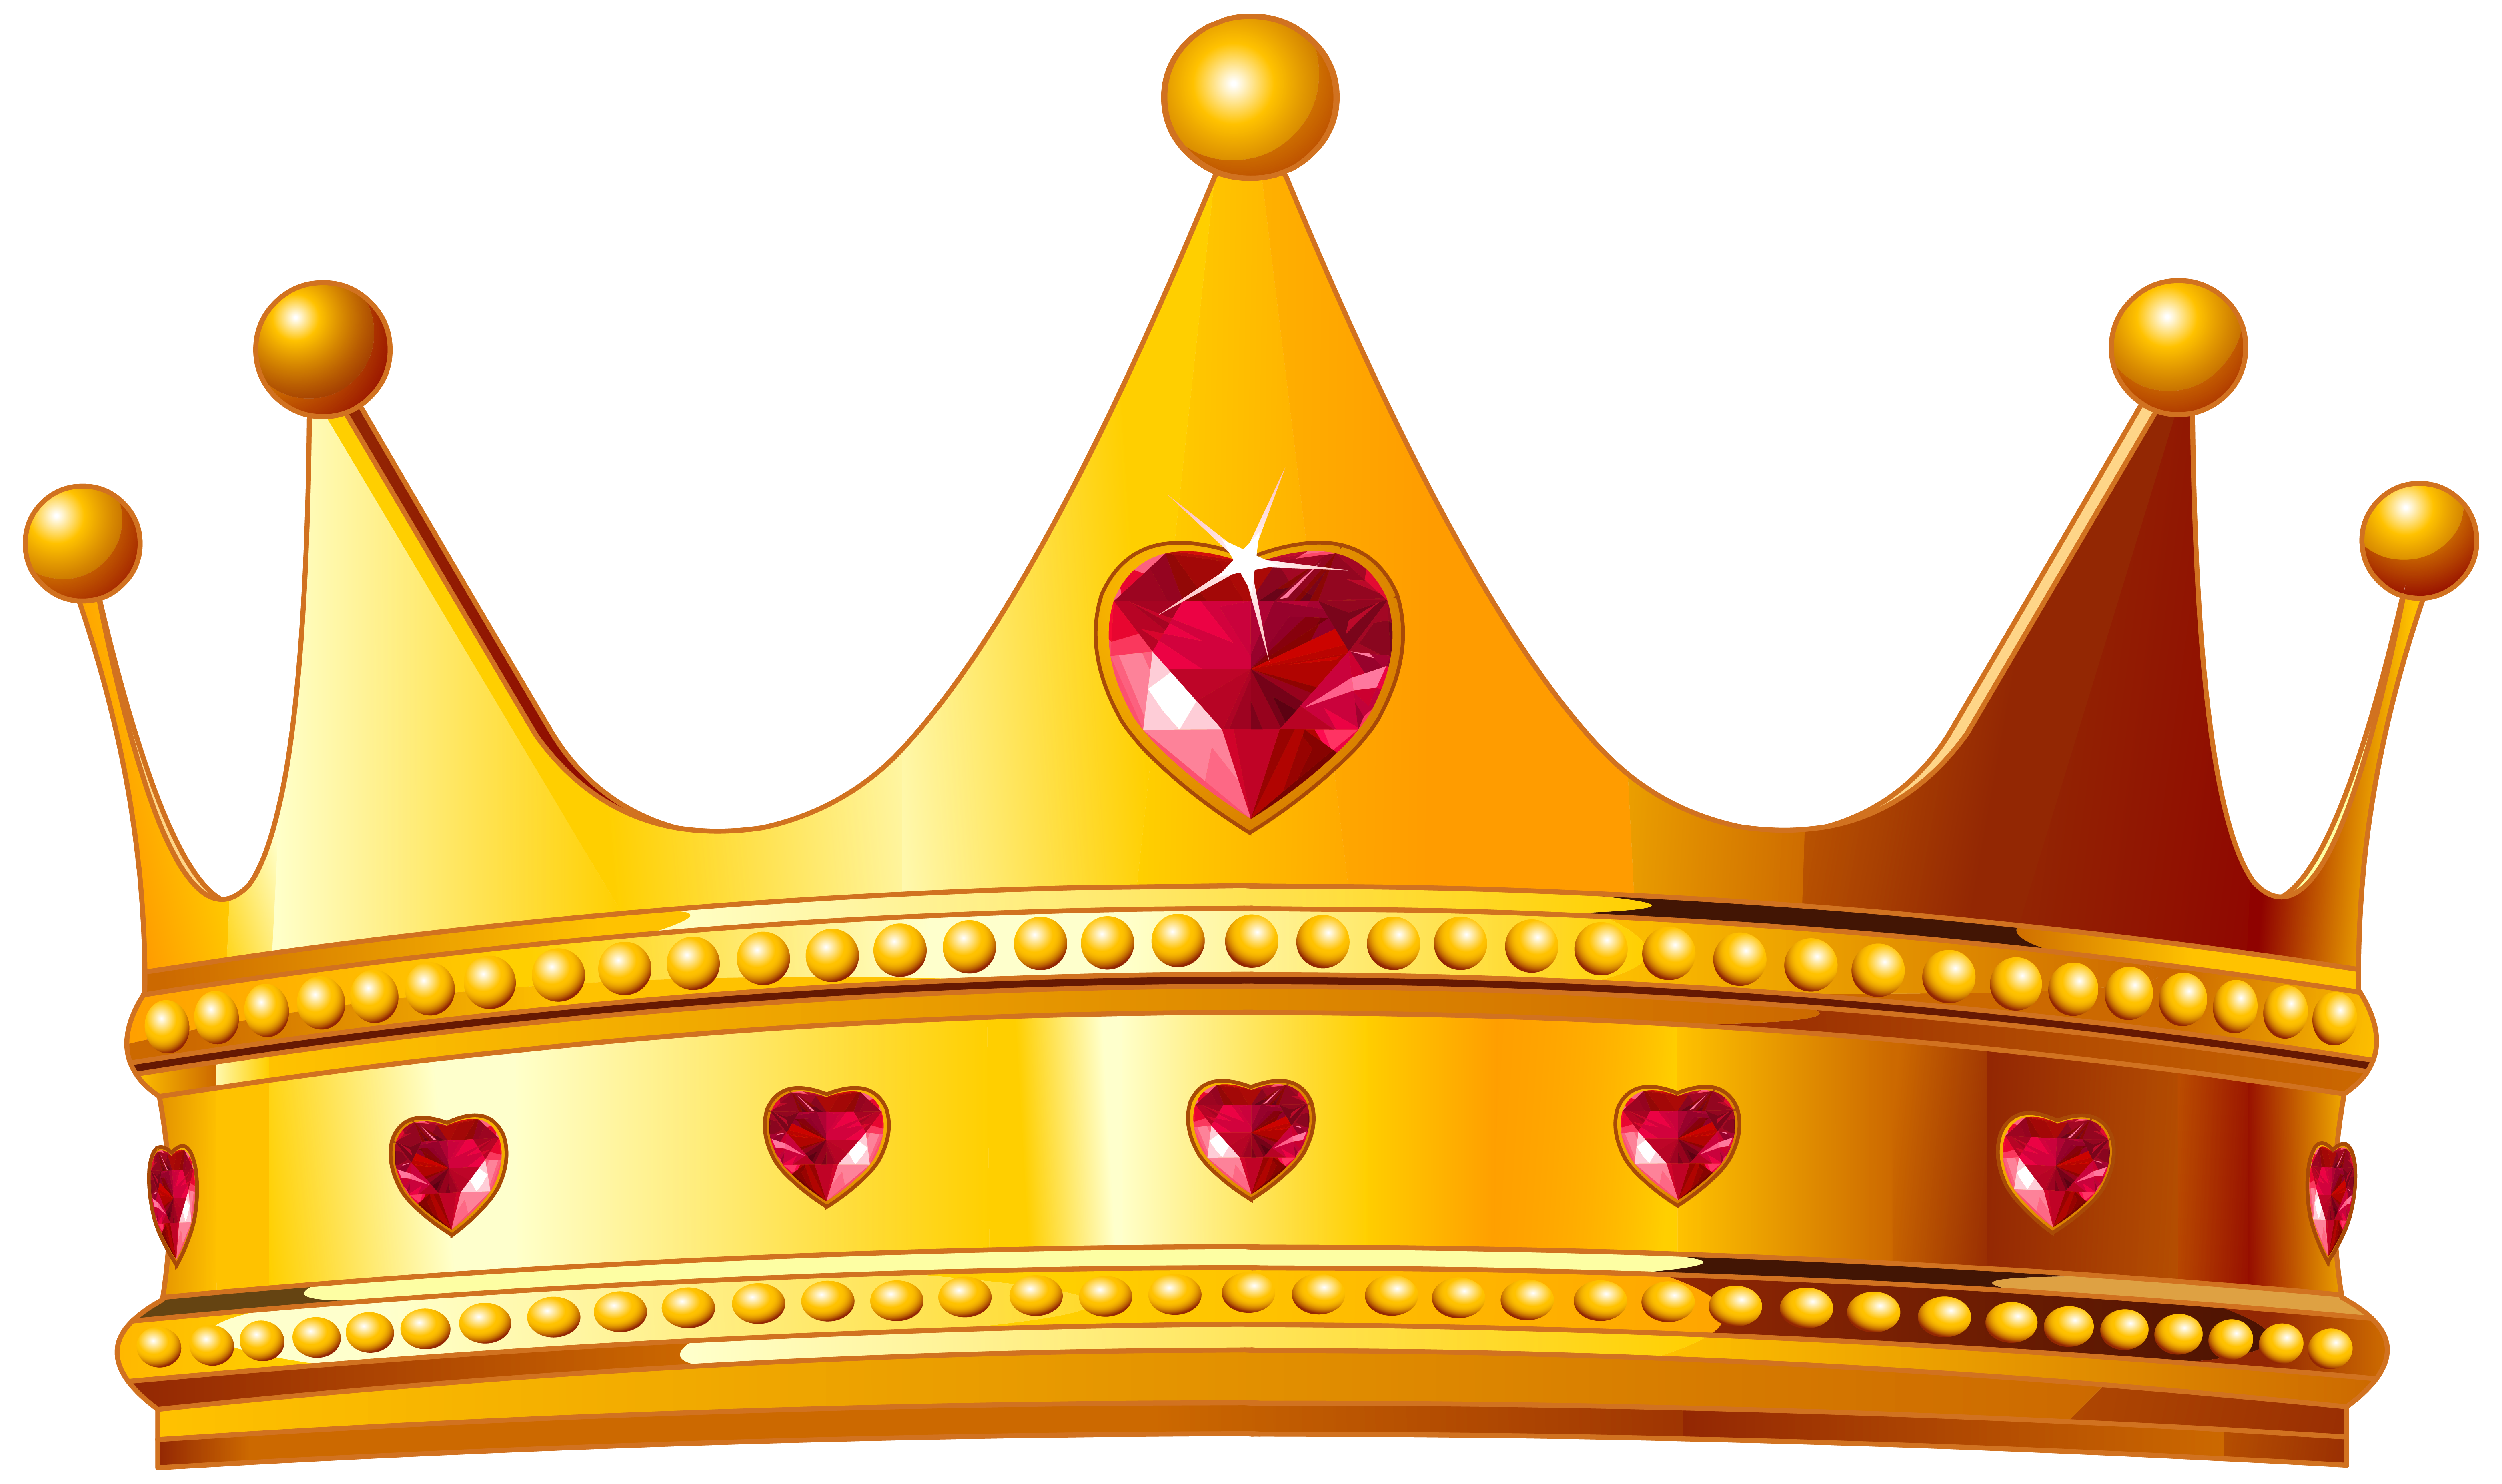 Golden Crown with Hearts PNG Clipart Image.